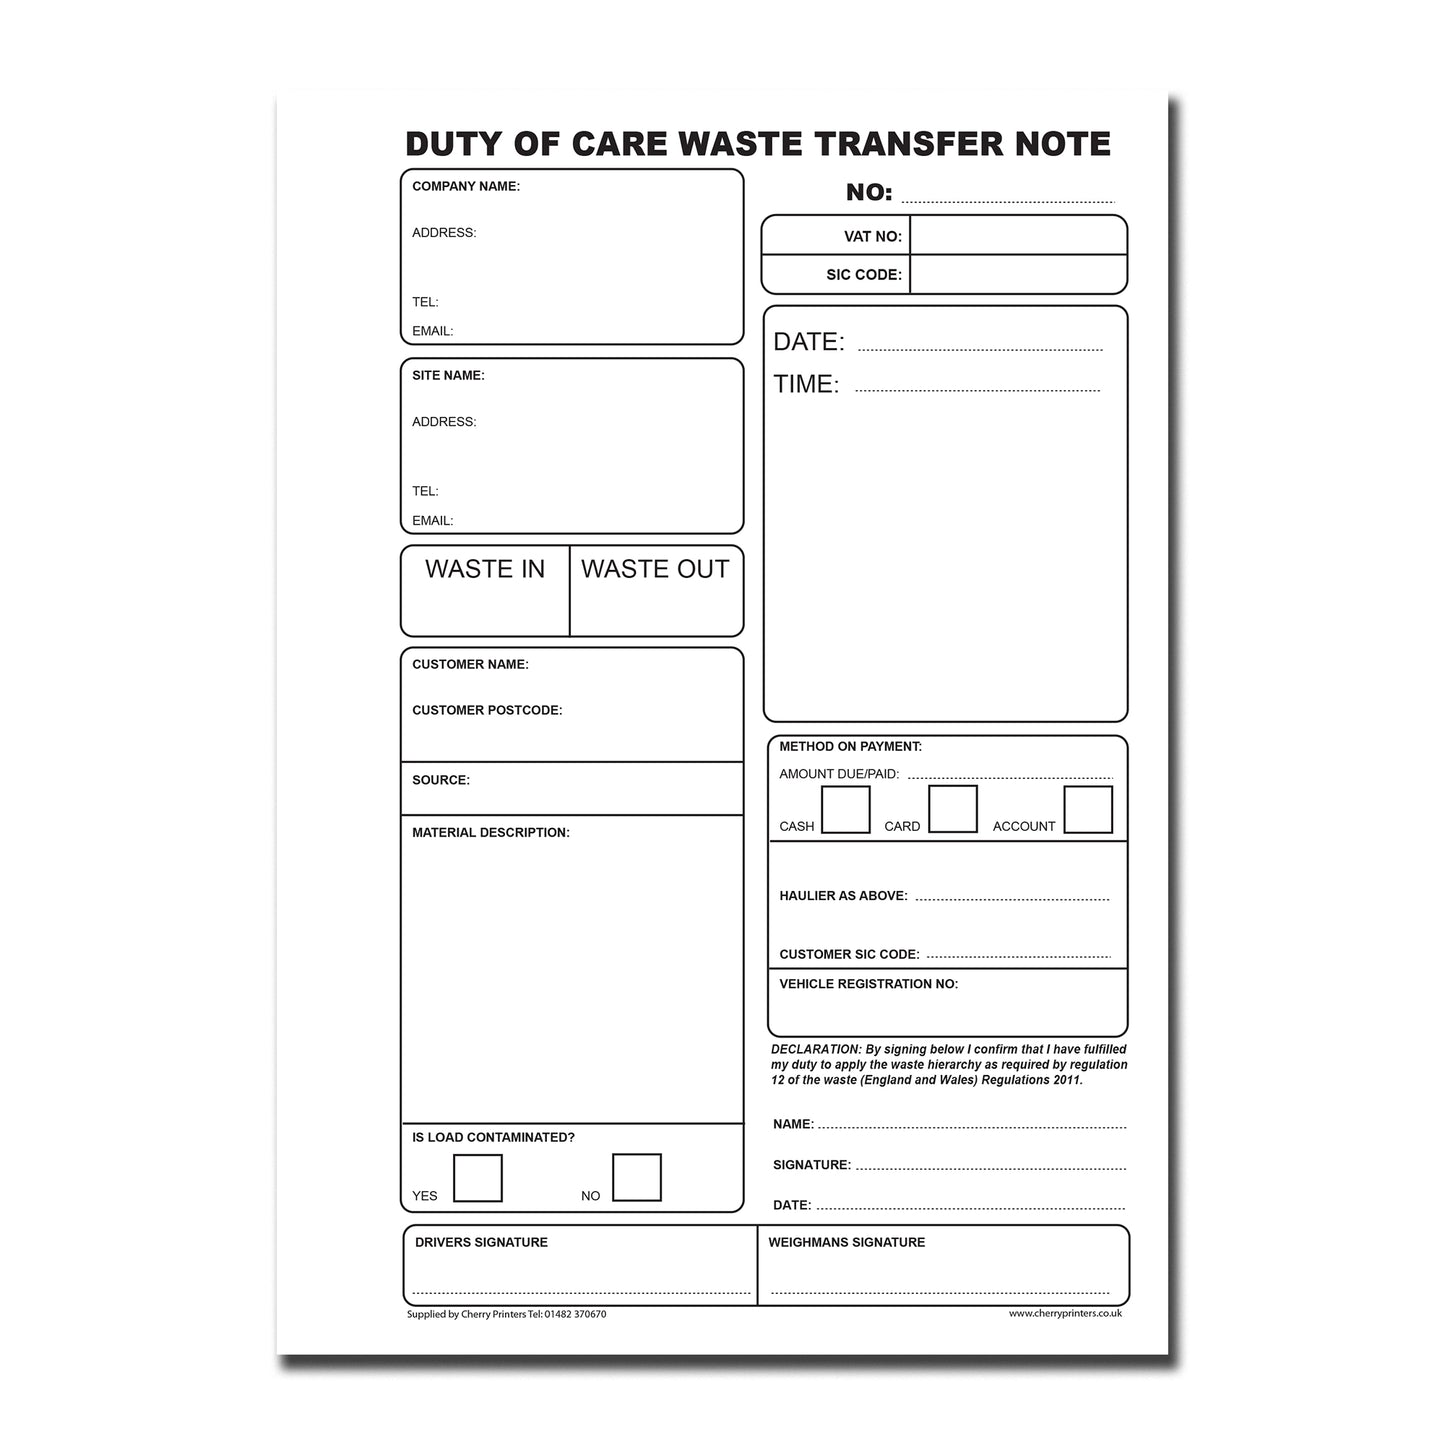 NCR Waste Transfer Book A5 Duplicate